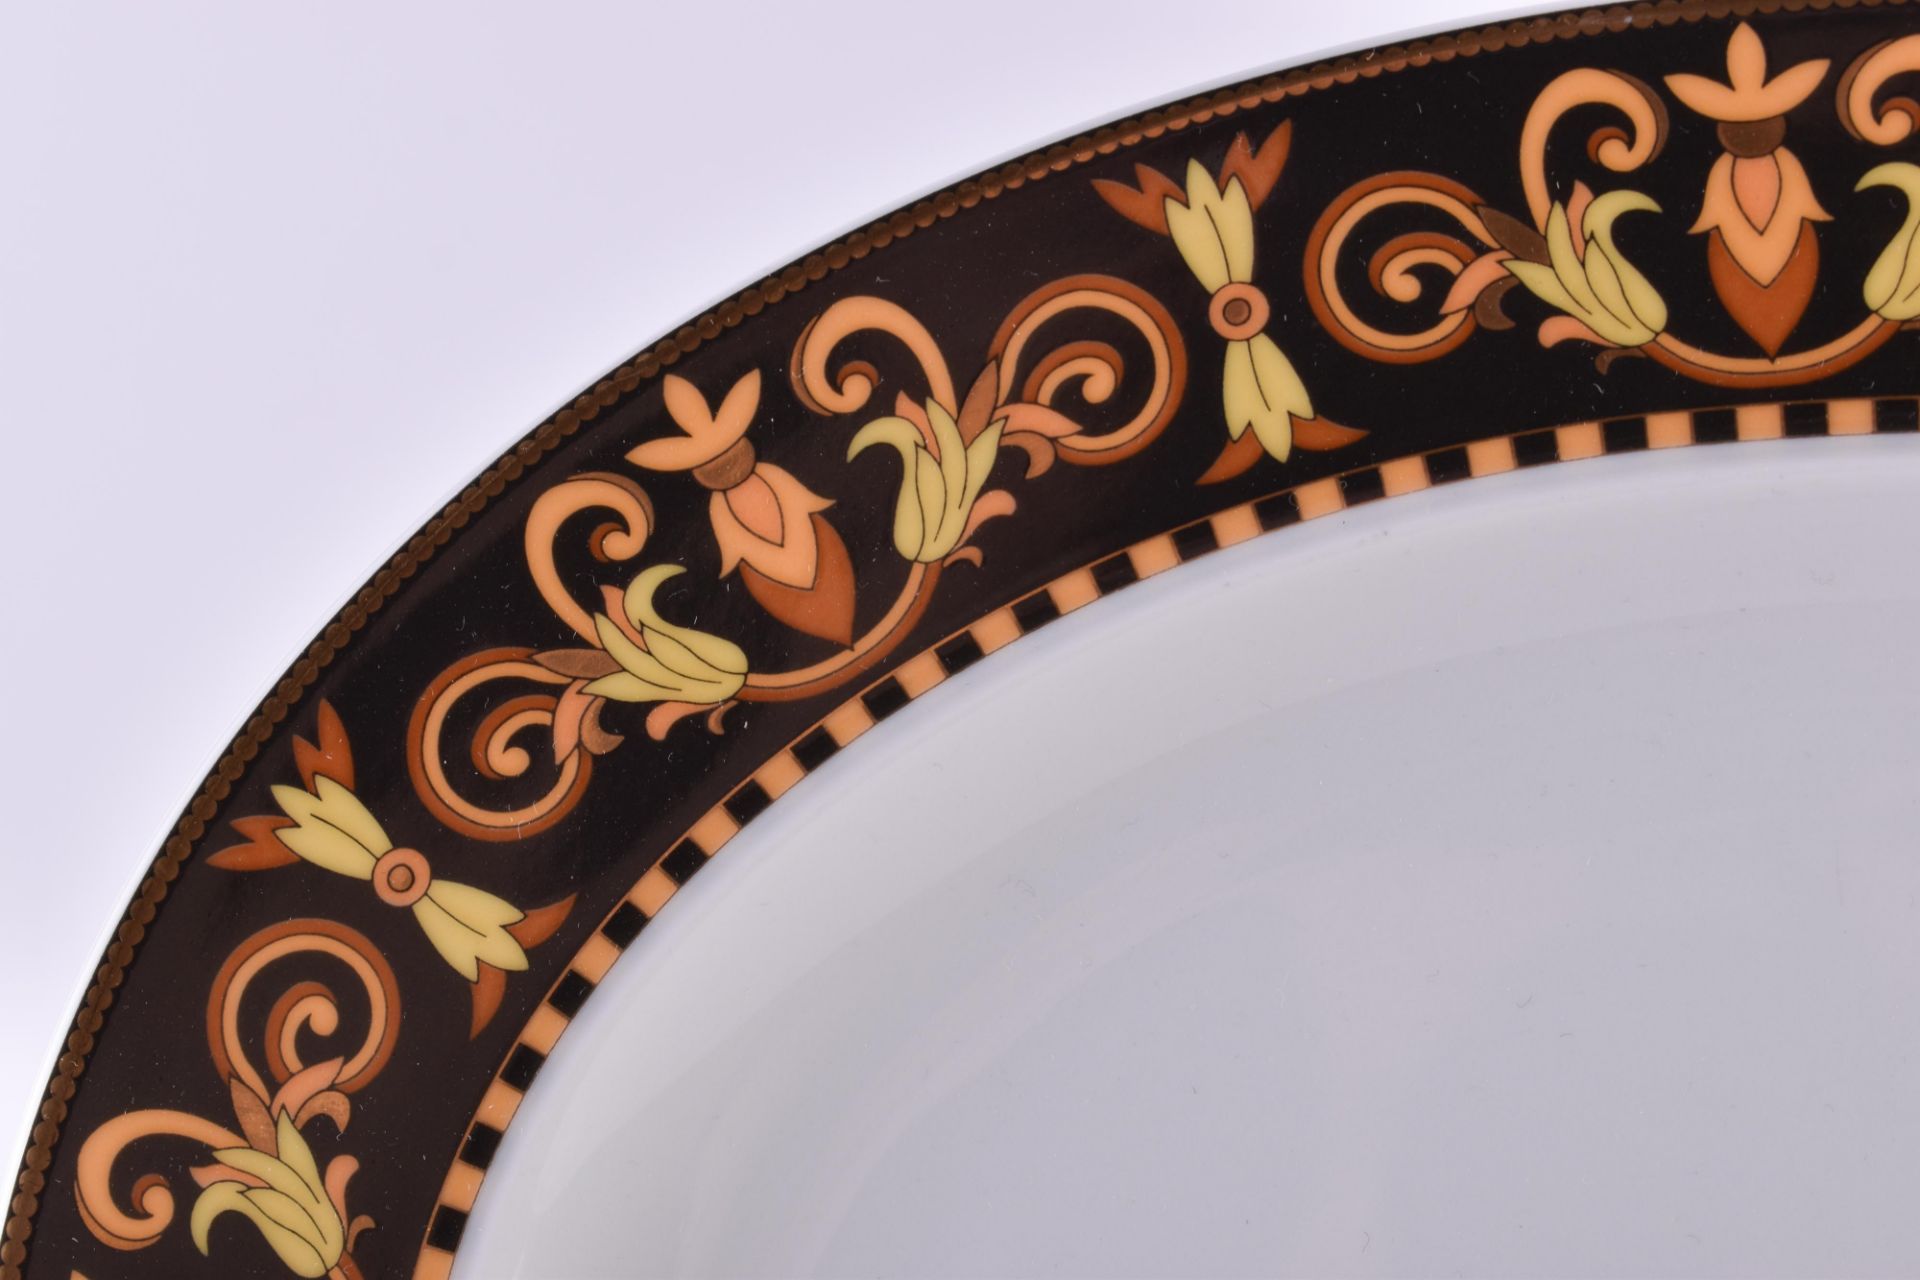 Offering plate Rosenthal Versace Barocco  - Image 2 of 3